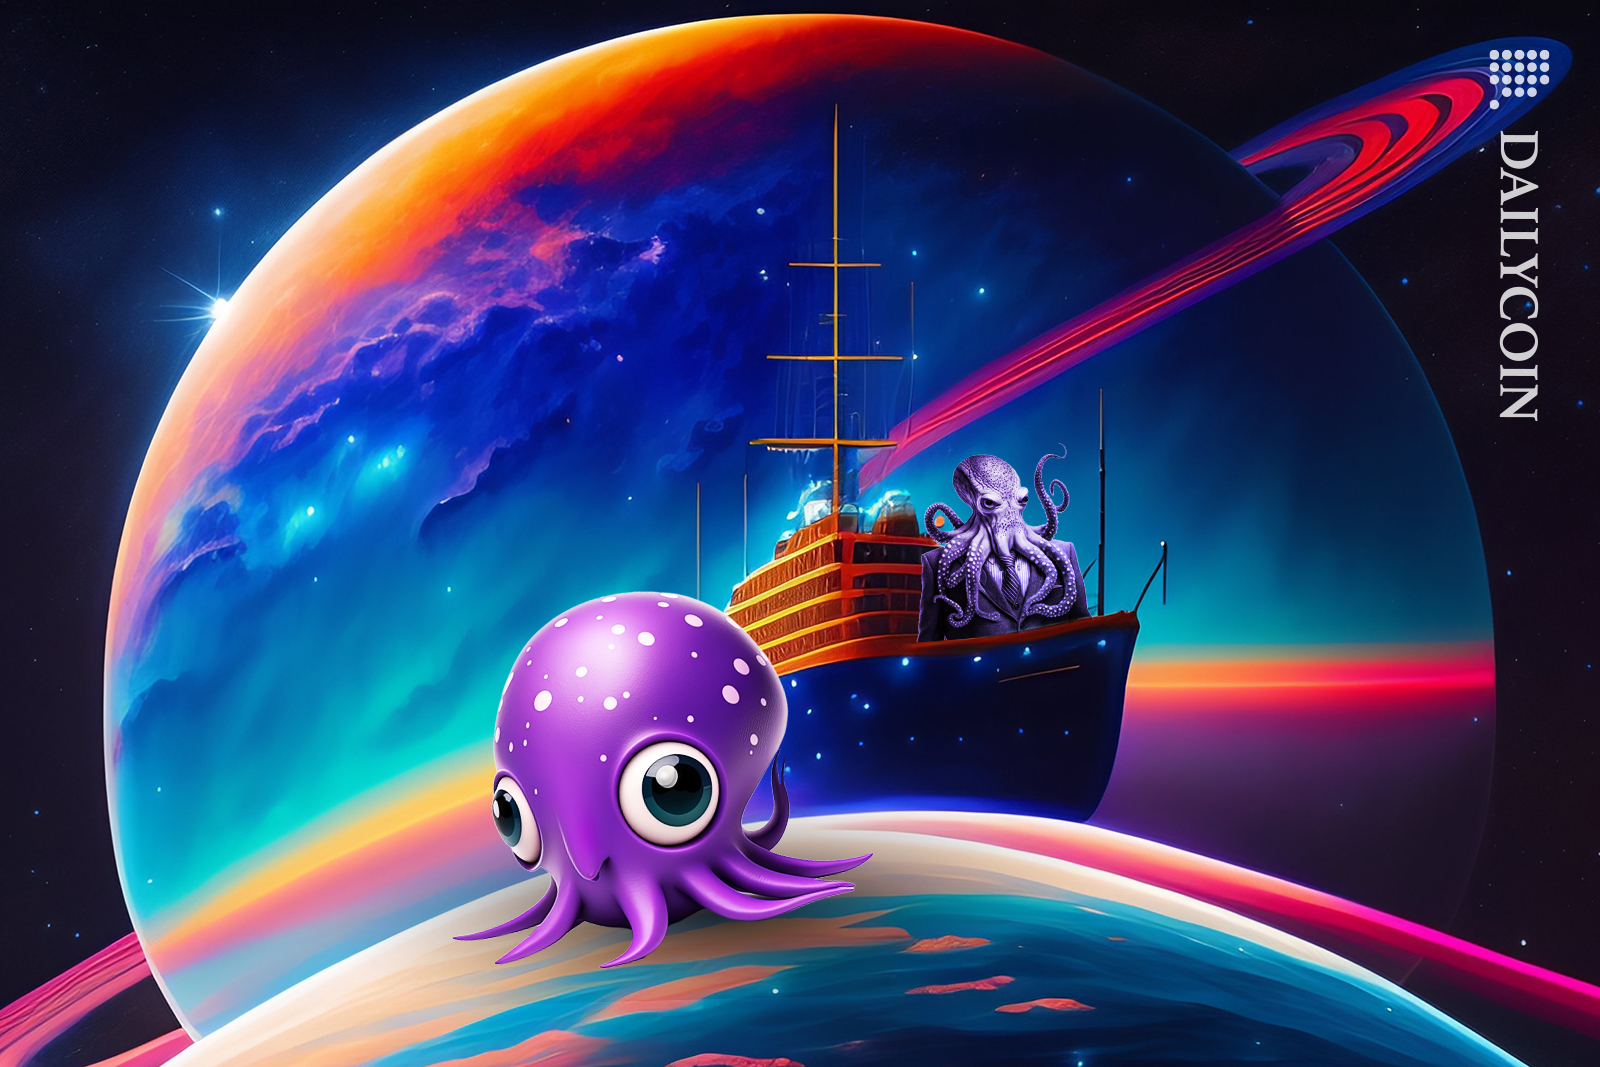 An octopus businessman on a ship sailing in the outer space behind a cute tiny octopus waving at him.